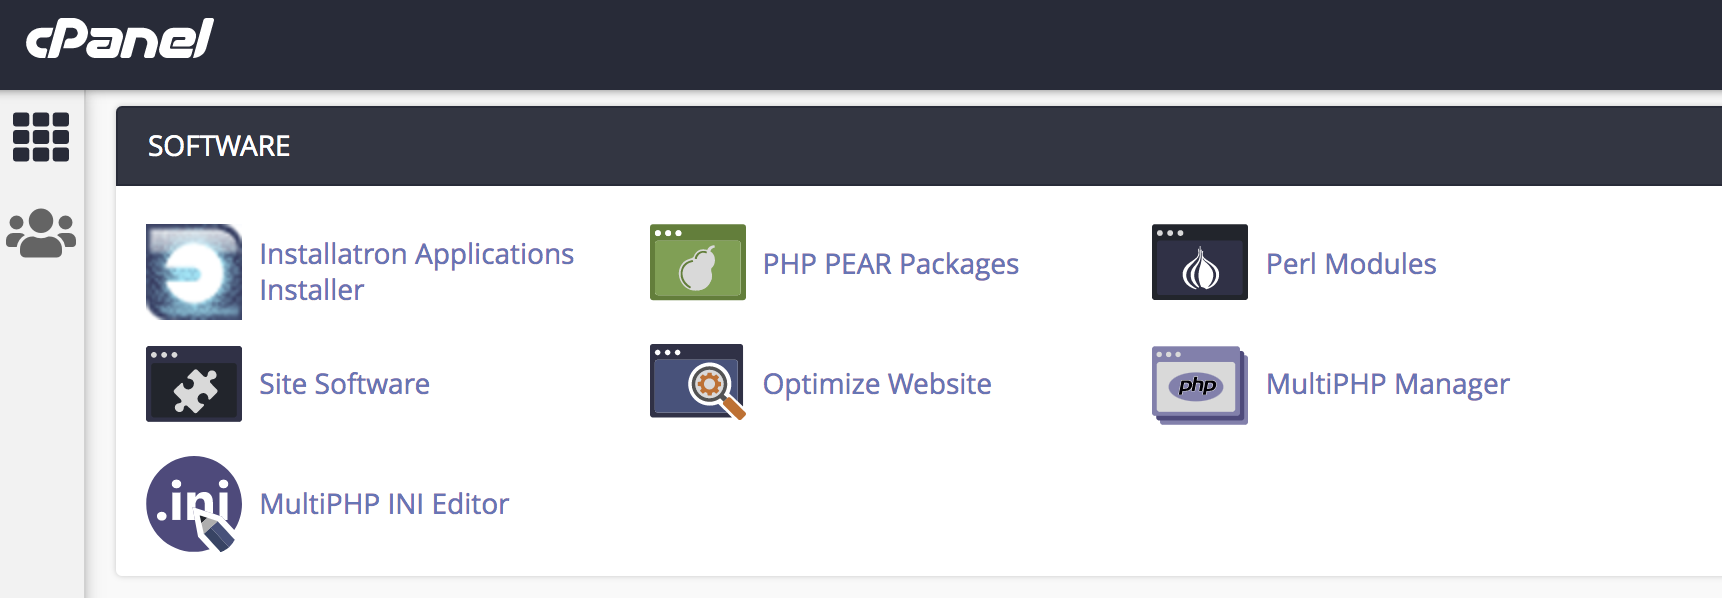 php files downloading instead of running cpanel